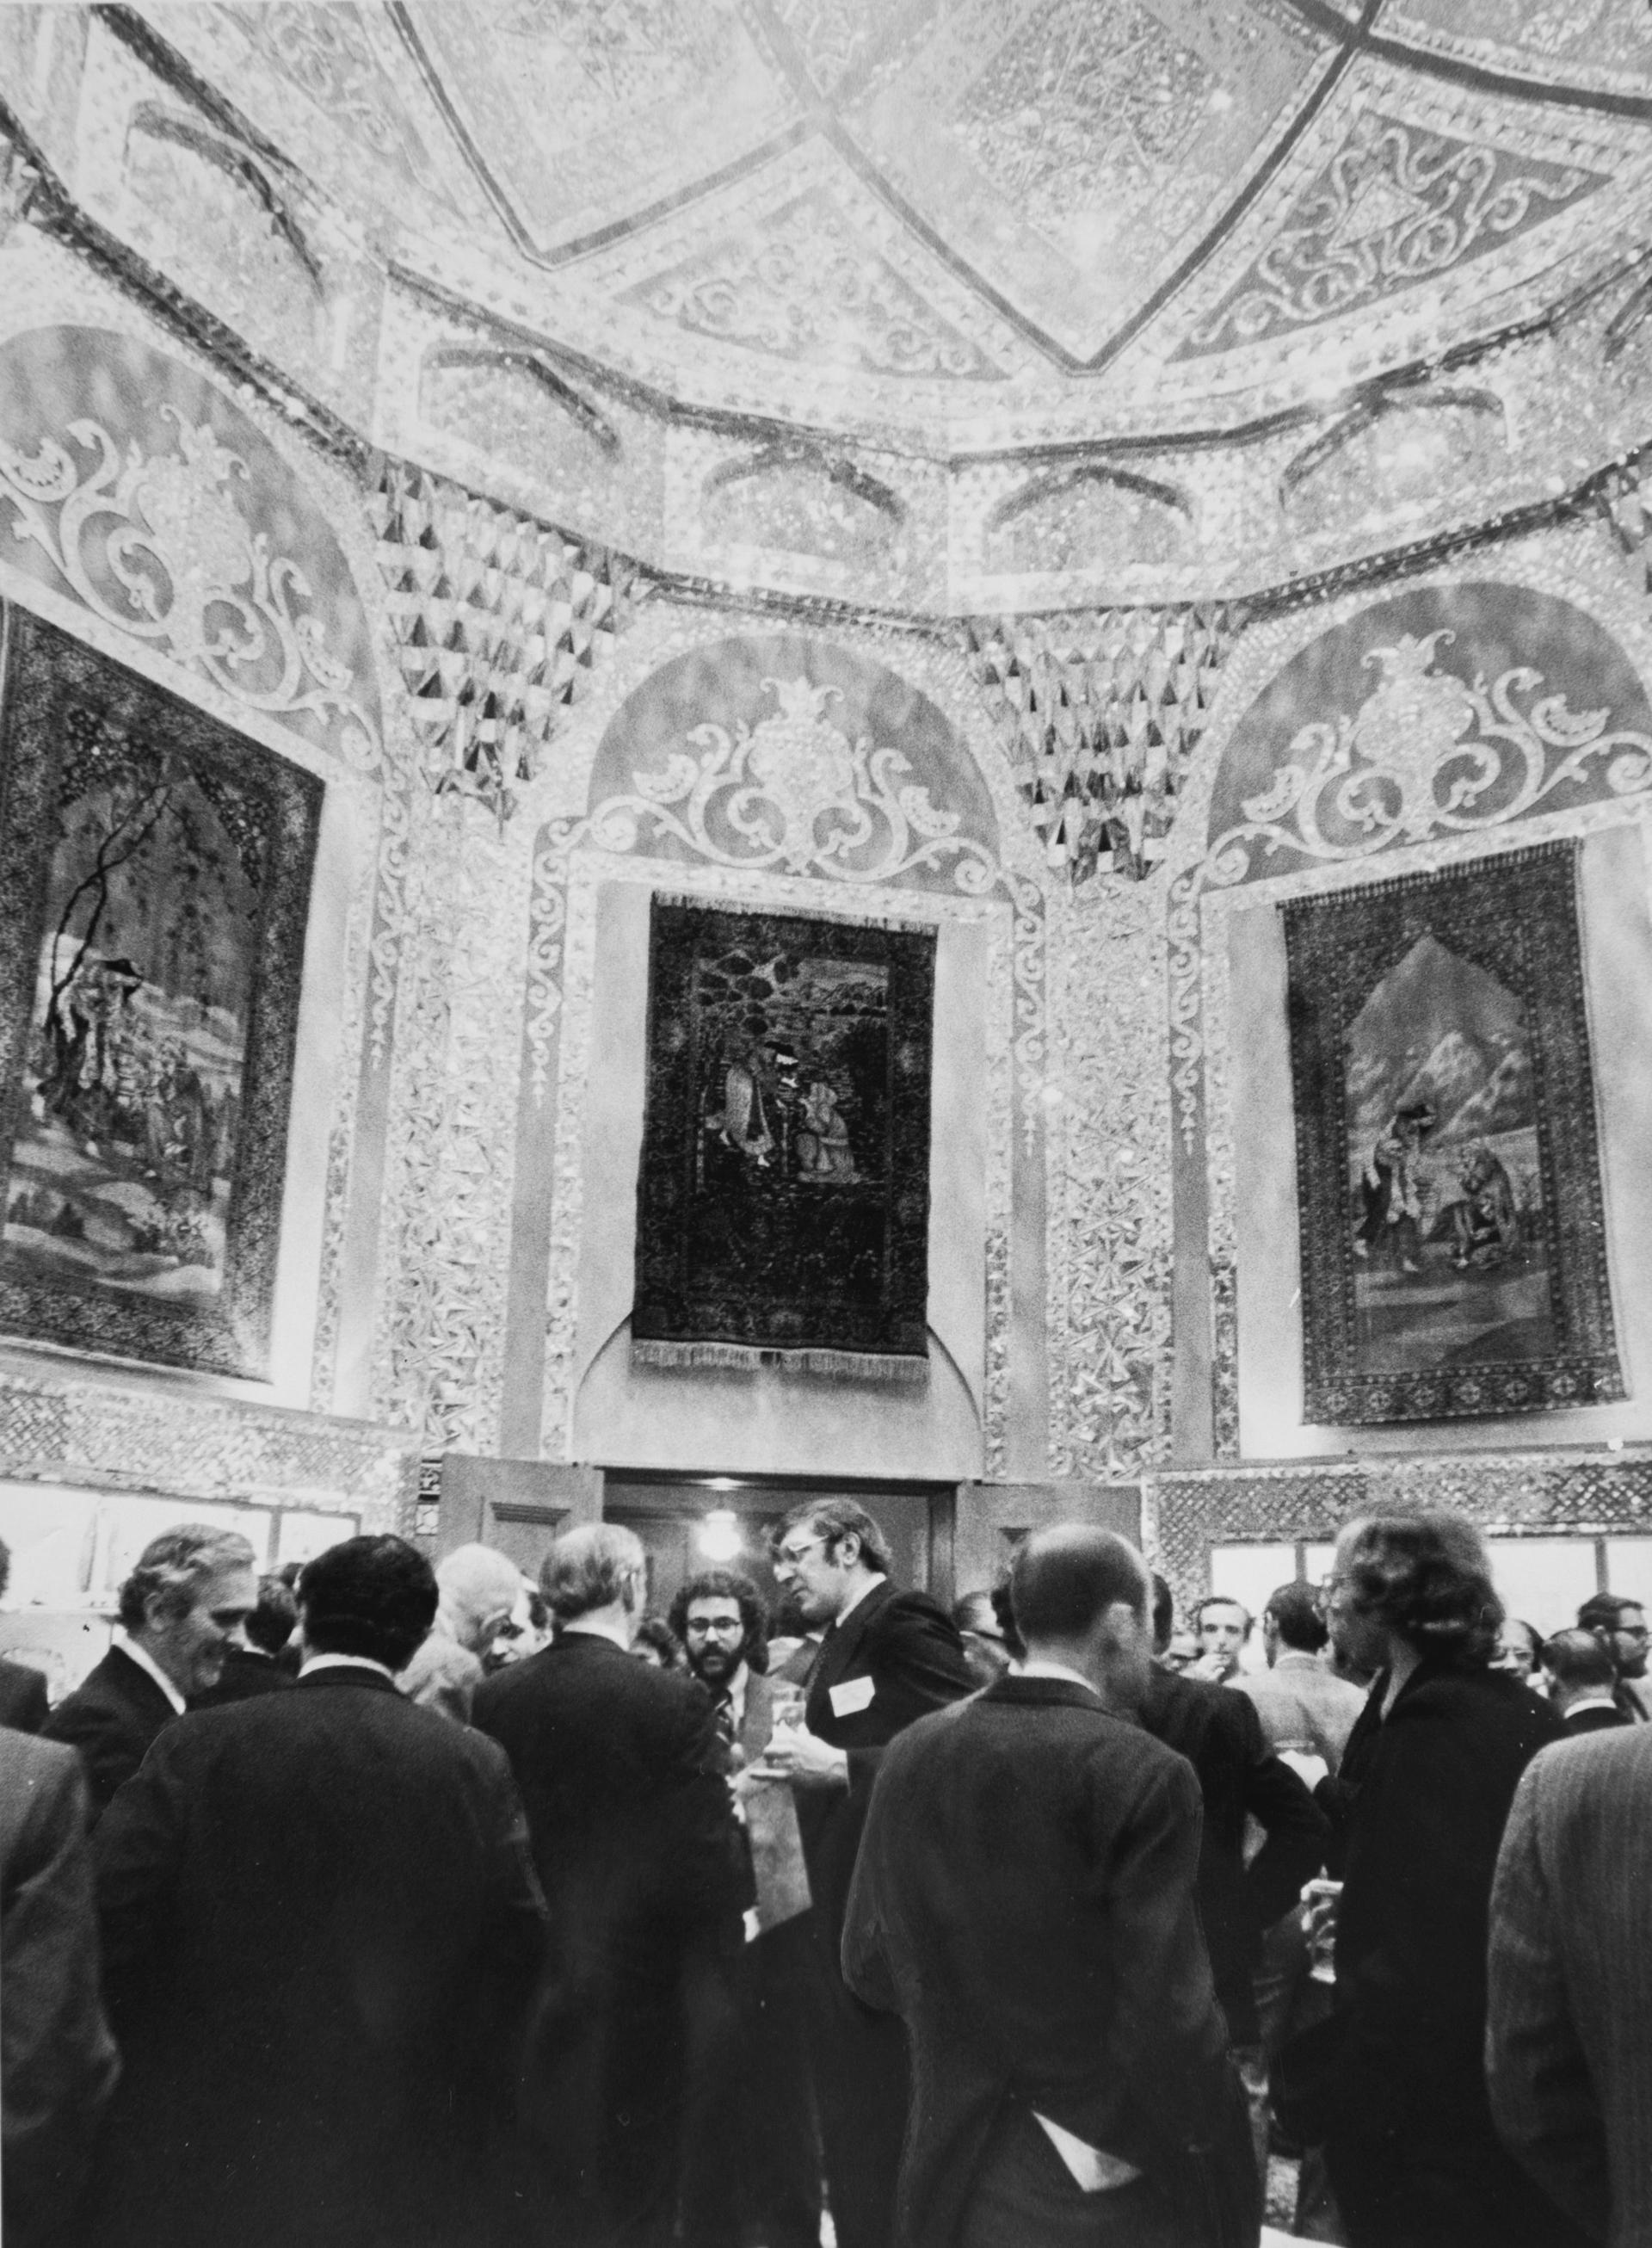 The Iranian Embassy's Mosaic Room is pictured in 1975.